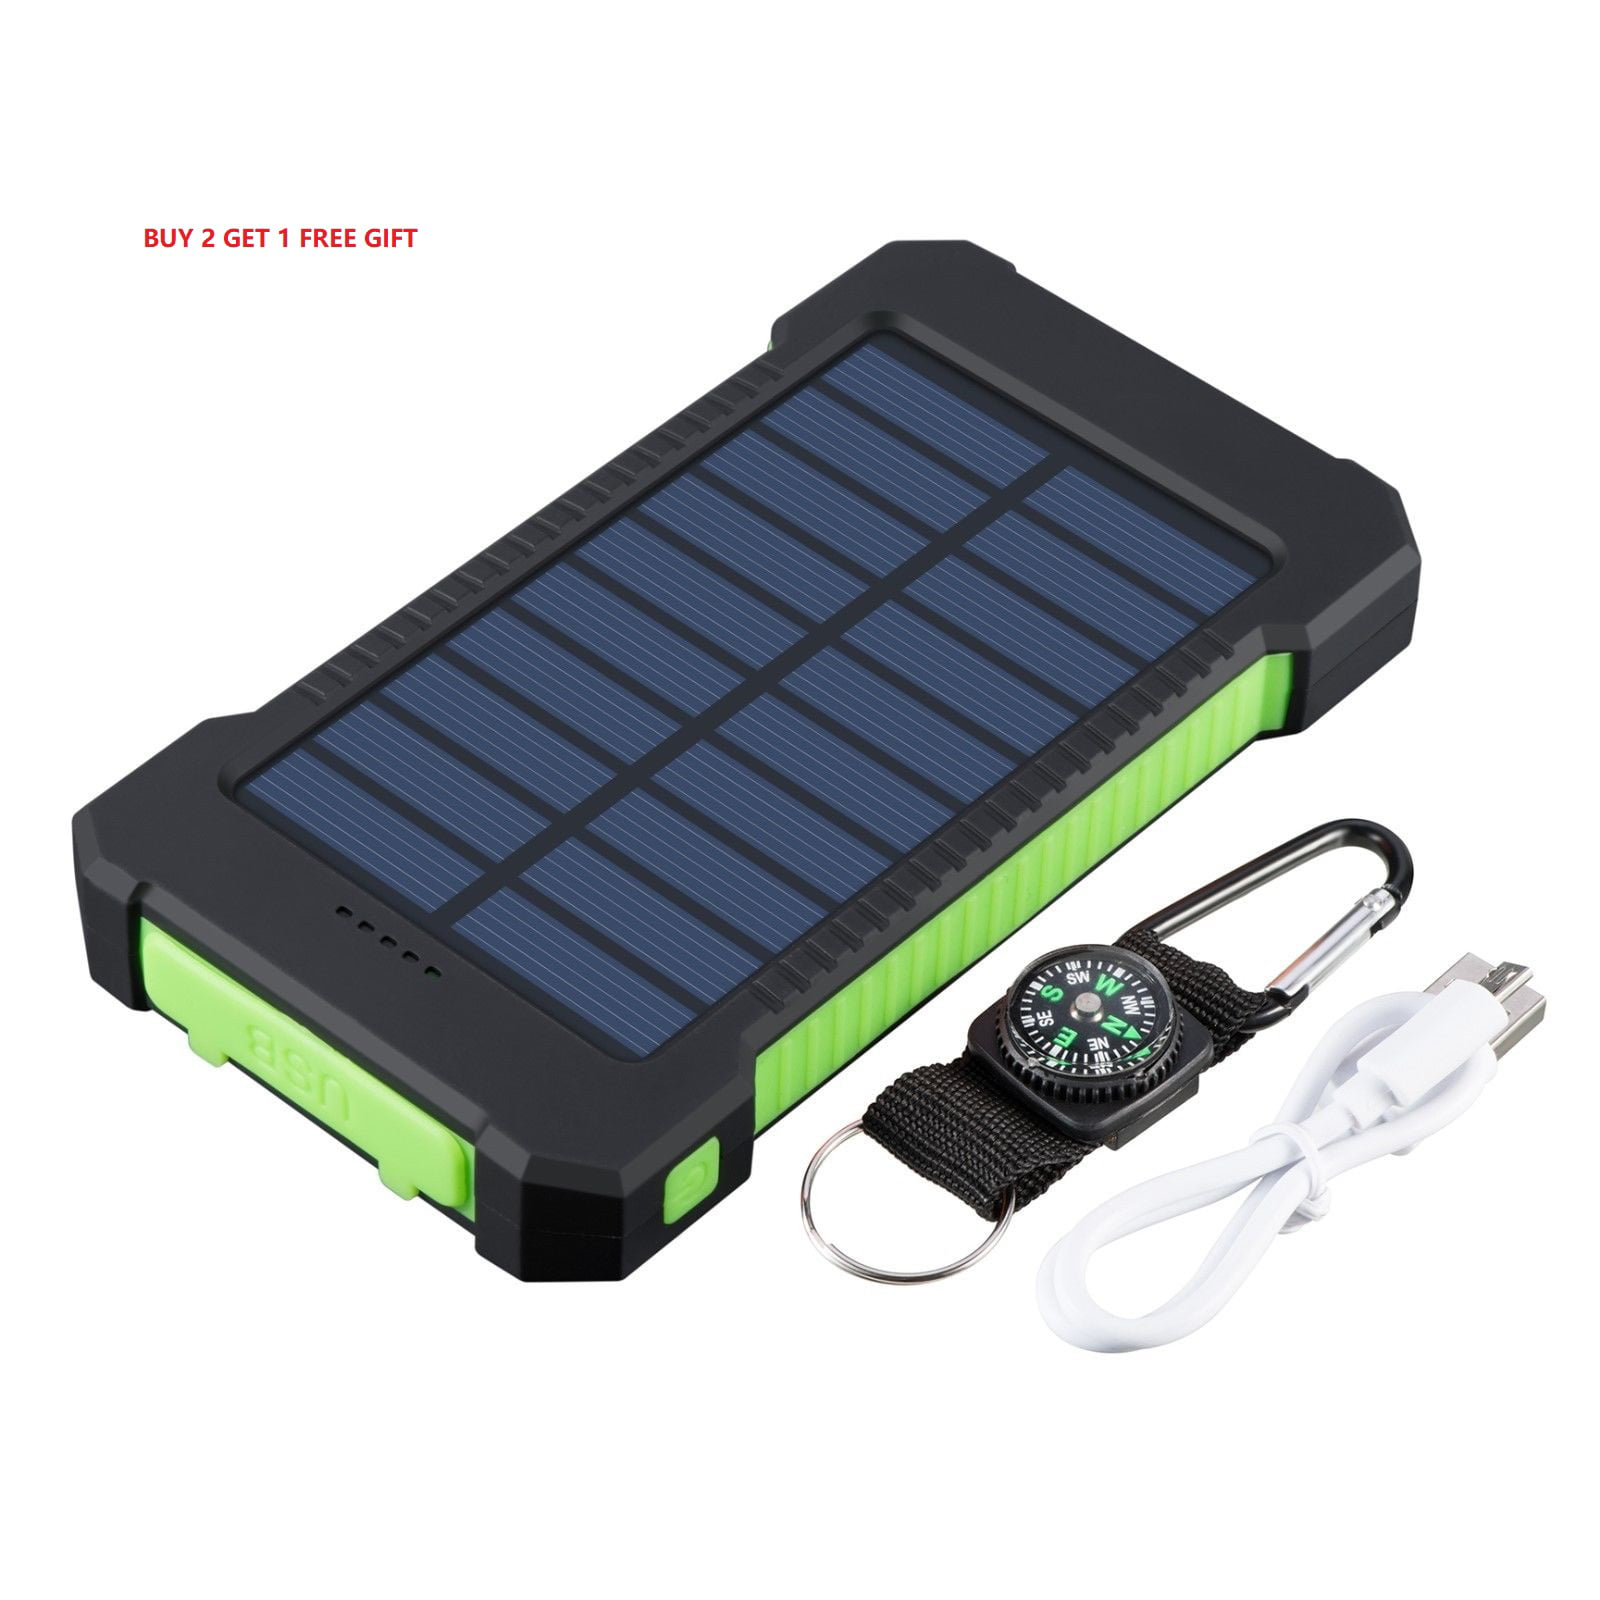 5200 mAH Battery with Solar Panel Red LED Lantern Solar Lights Helio Solar Phone Charger Camping Flashlight with USB Charger 